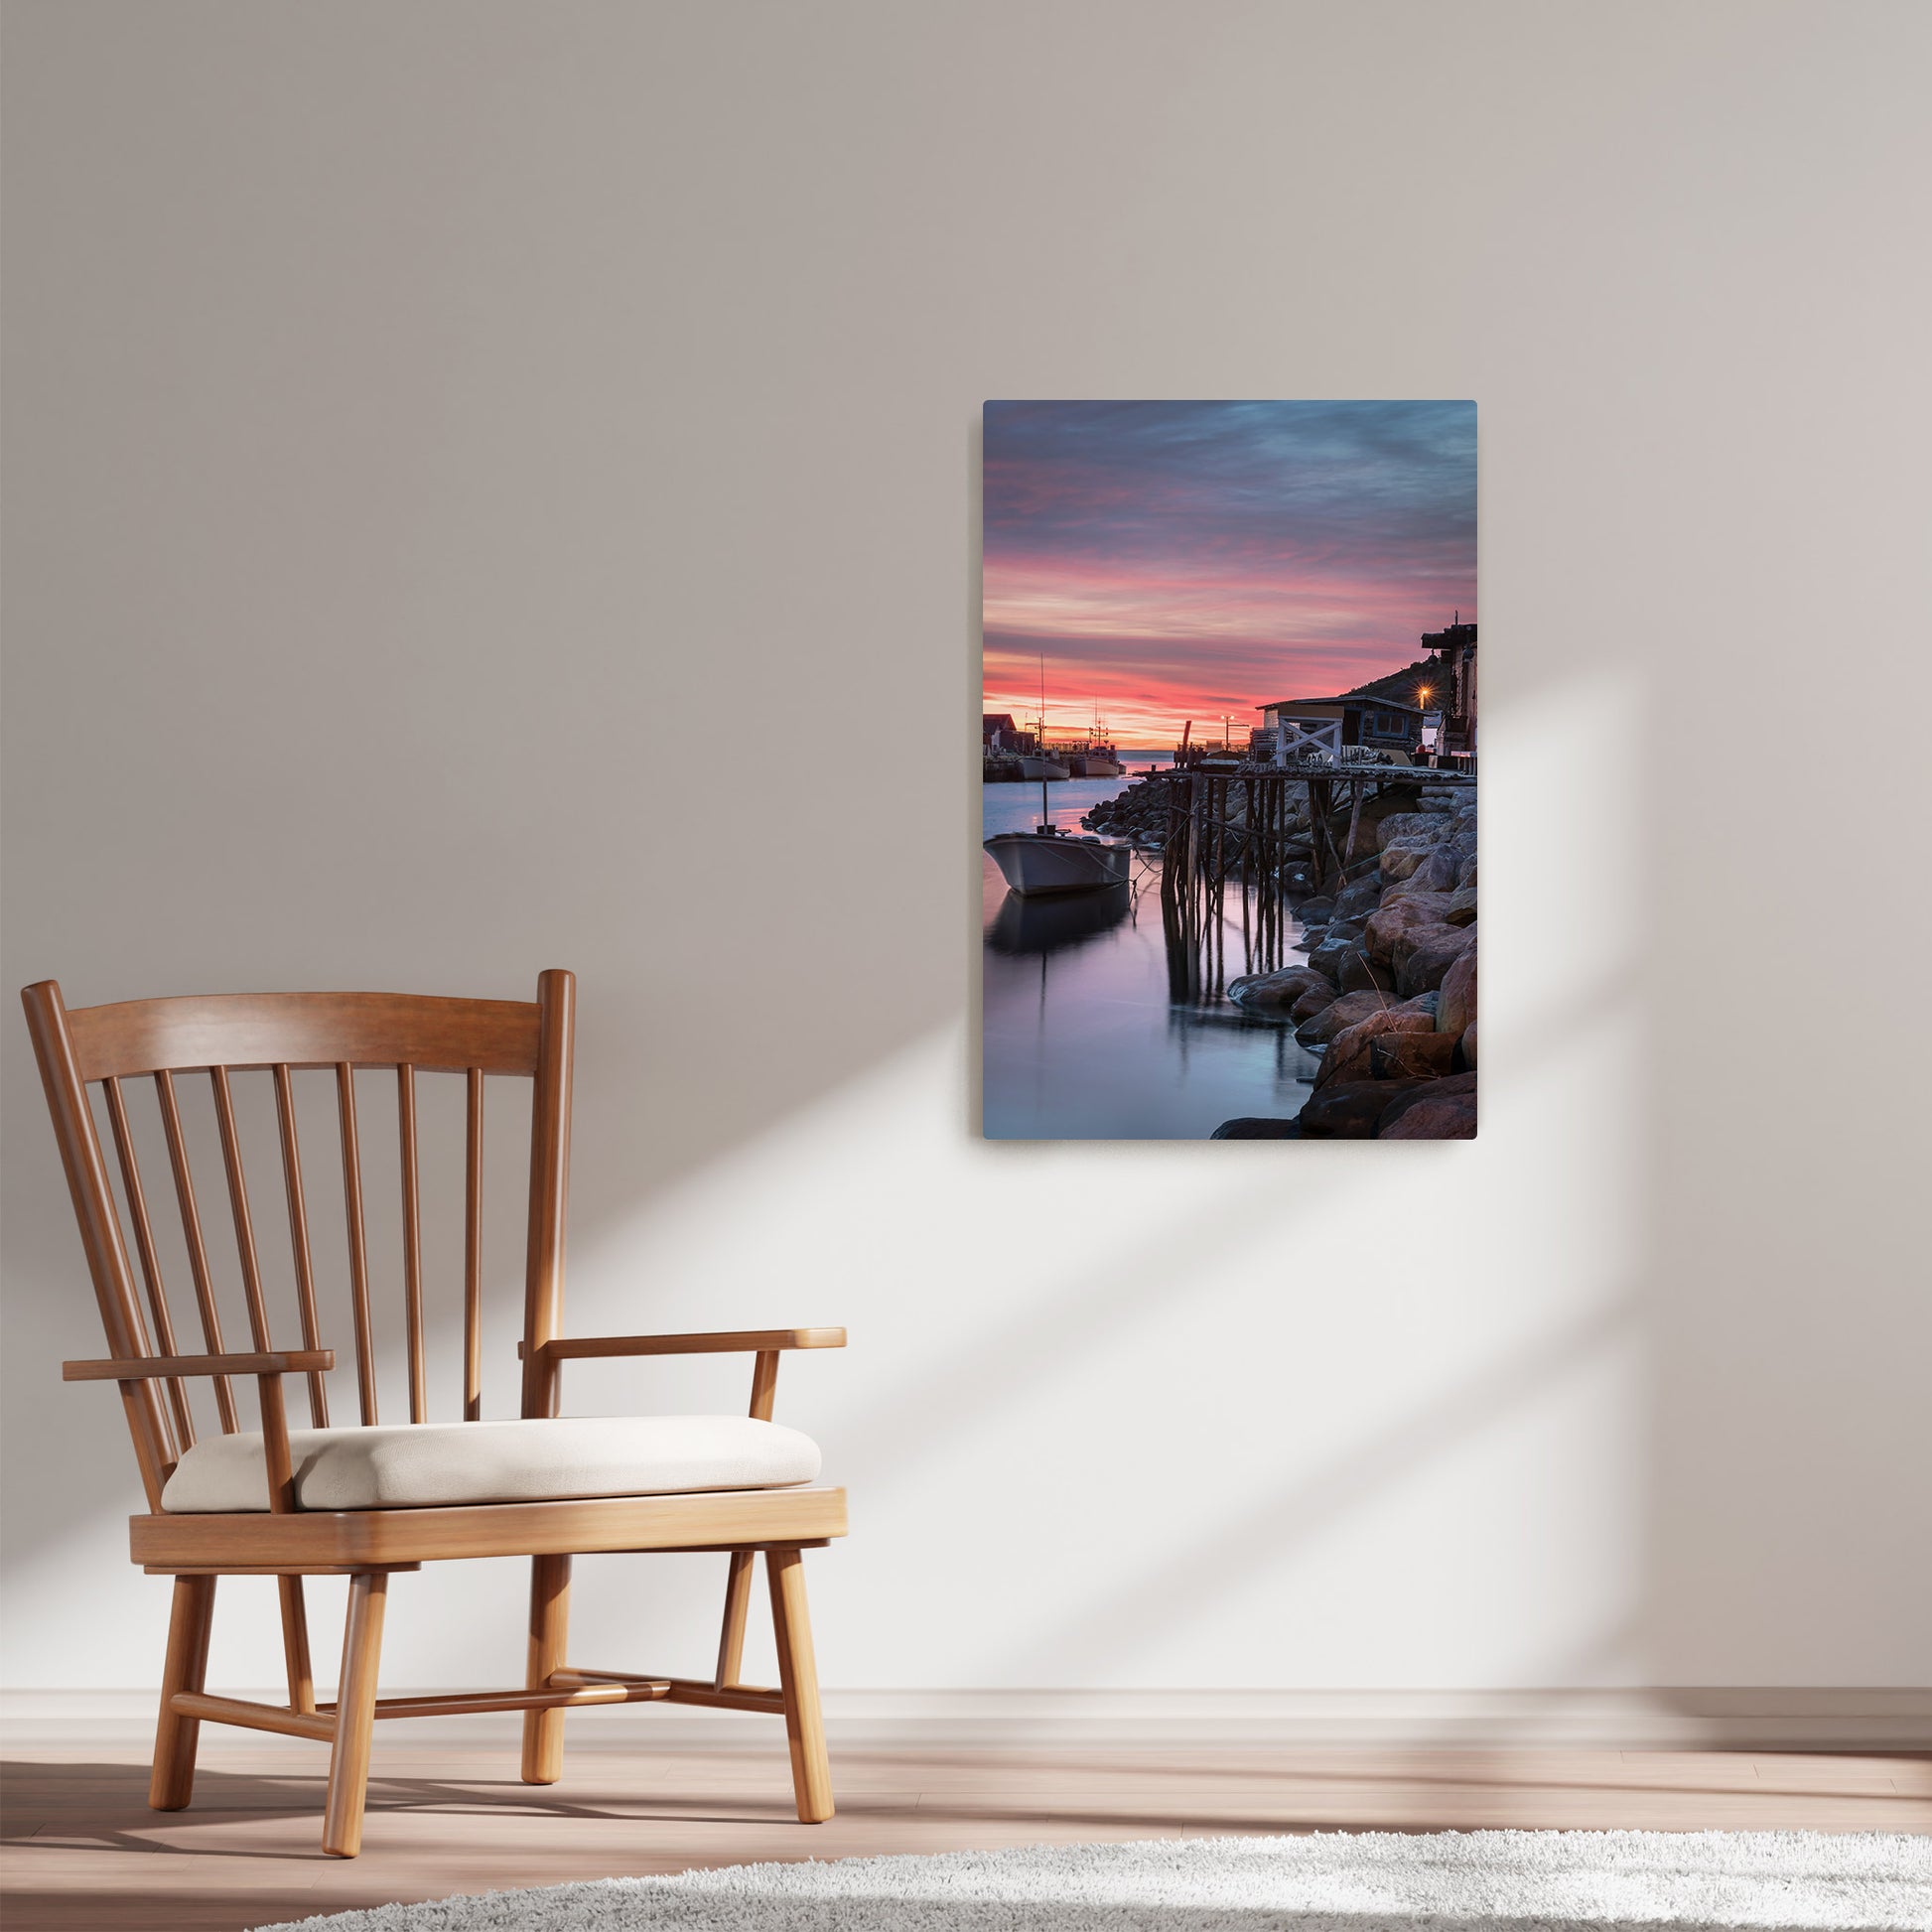 Ray Mackey's Petty Harbour Sunrise photography reproduced on HD metal print and displayed on wall